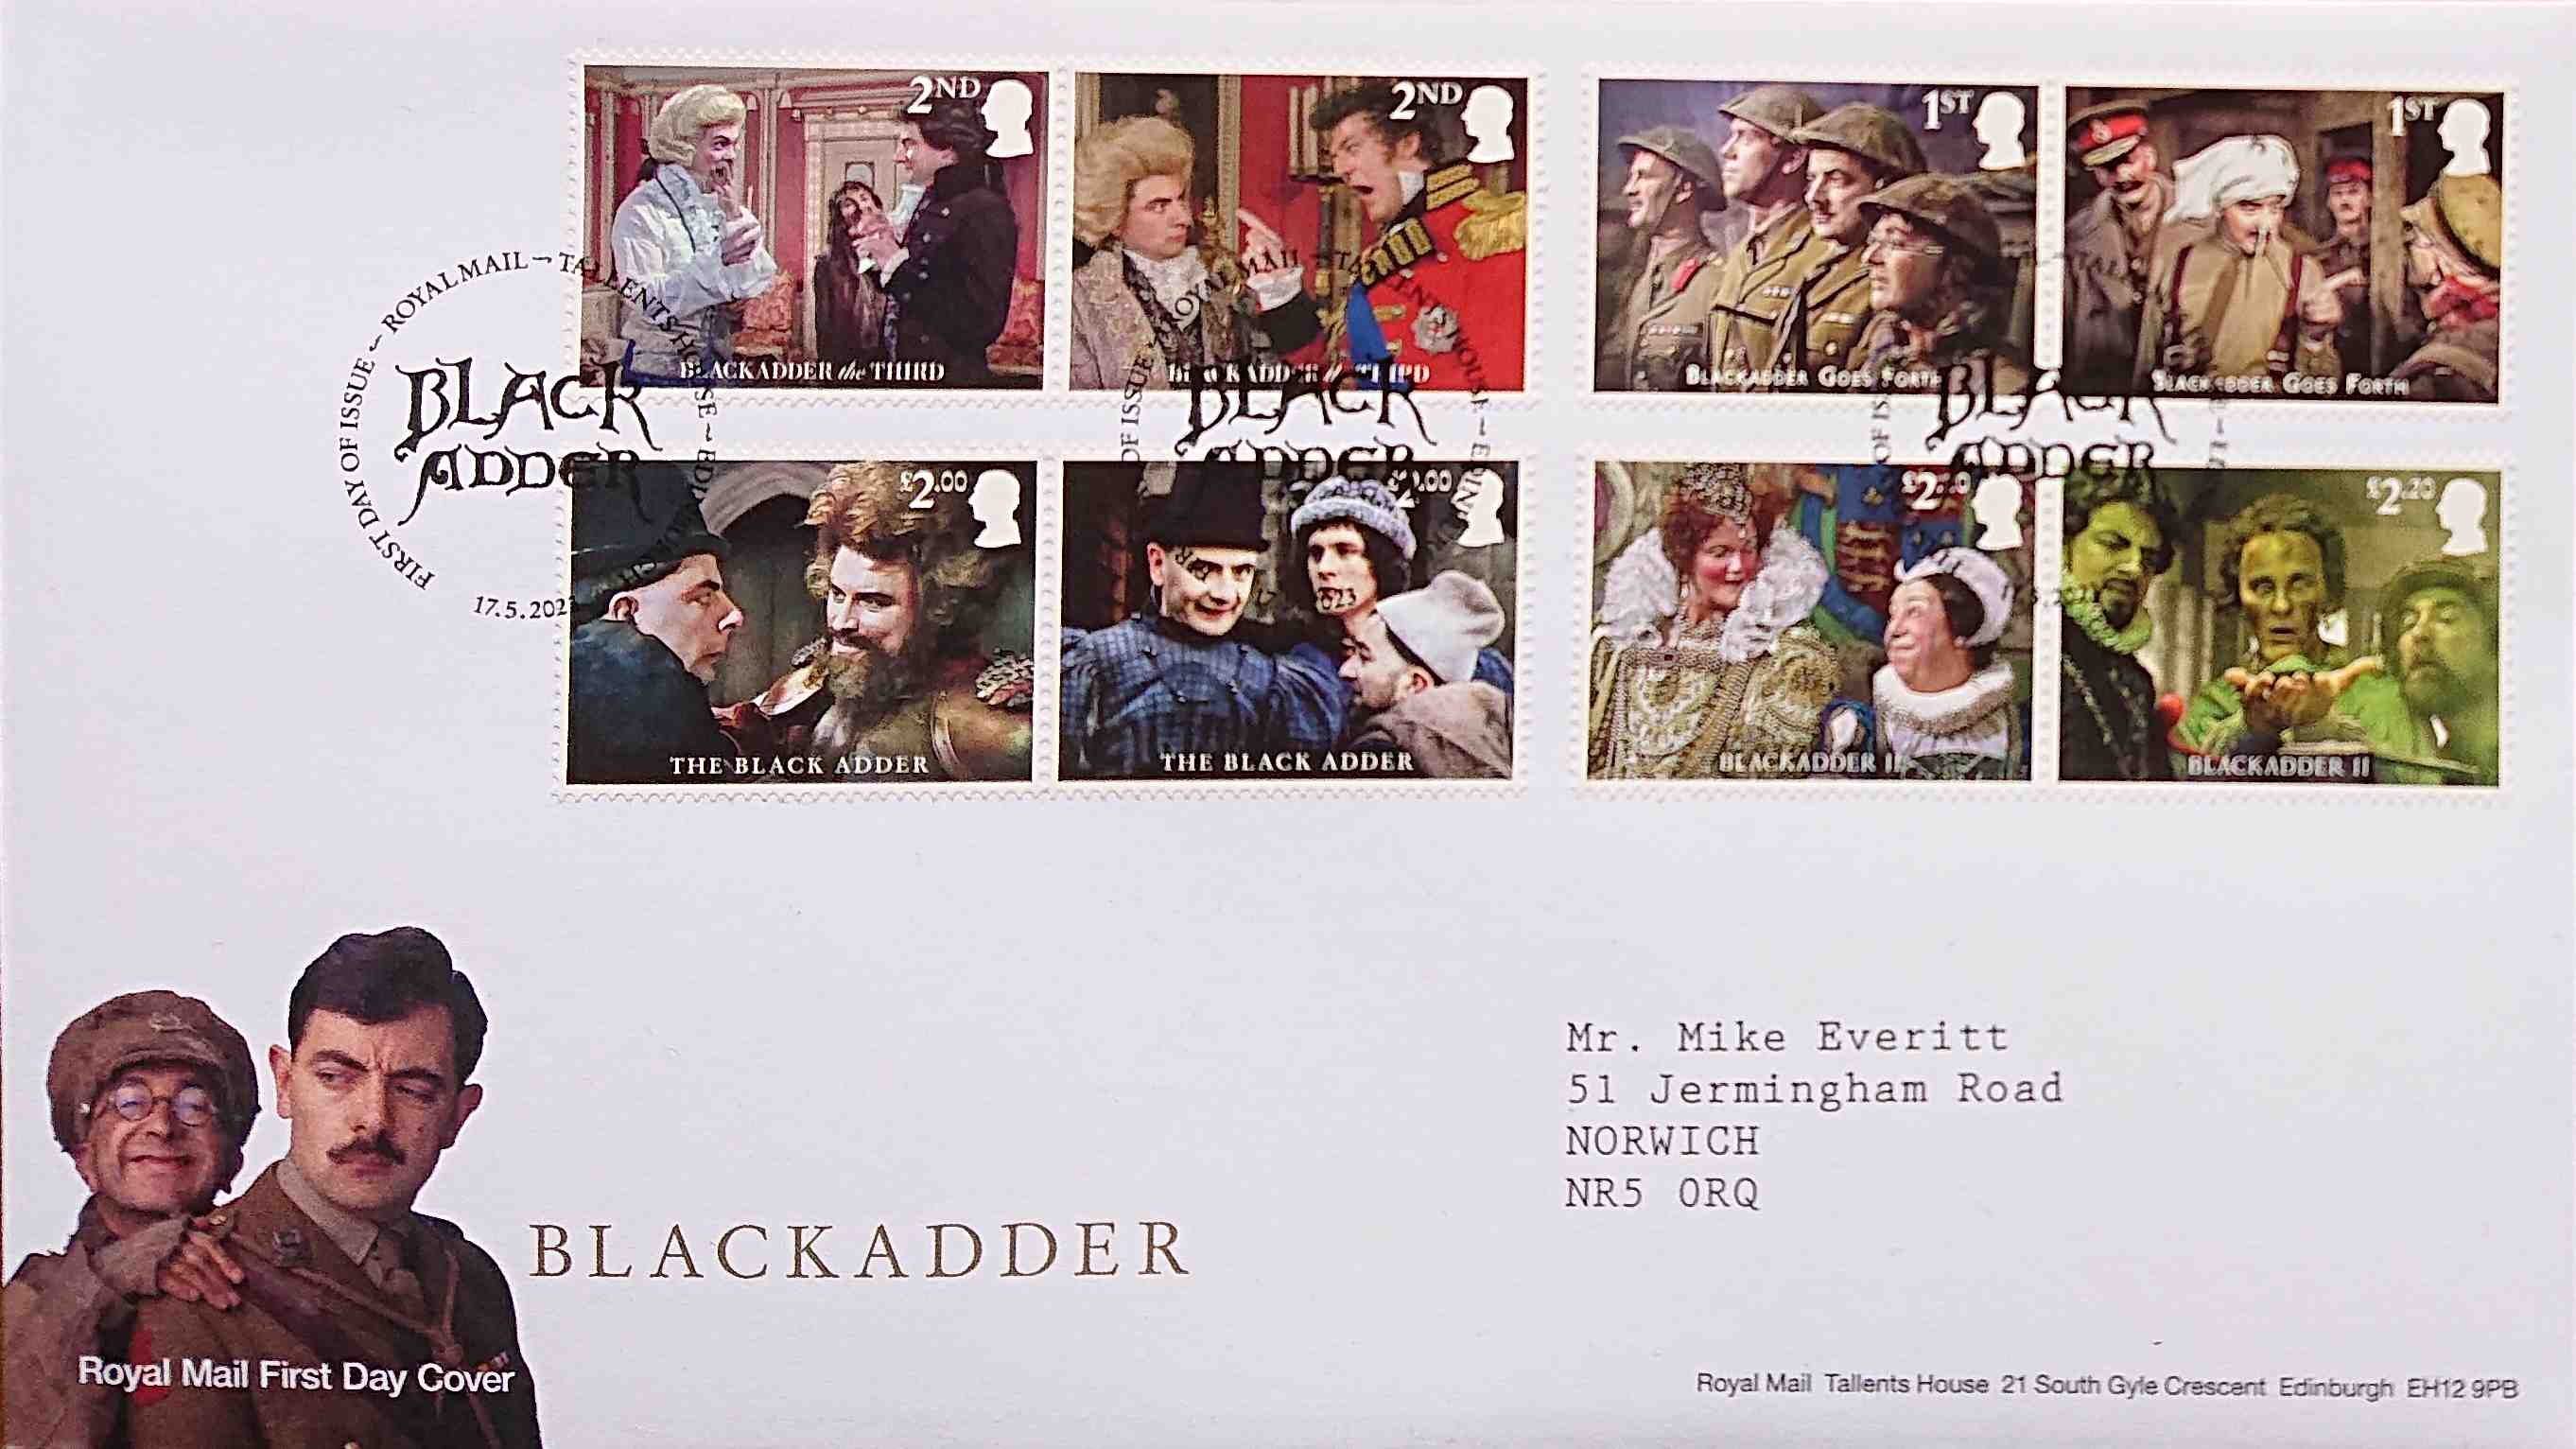 Picture of FDC-BA Black Adder - Royal Mail first day cover by artist Tom Huddleston from the BBC records and Tapes library